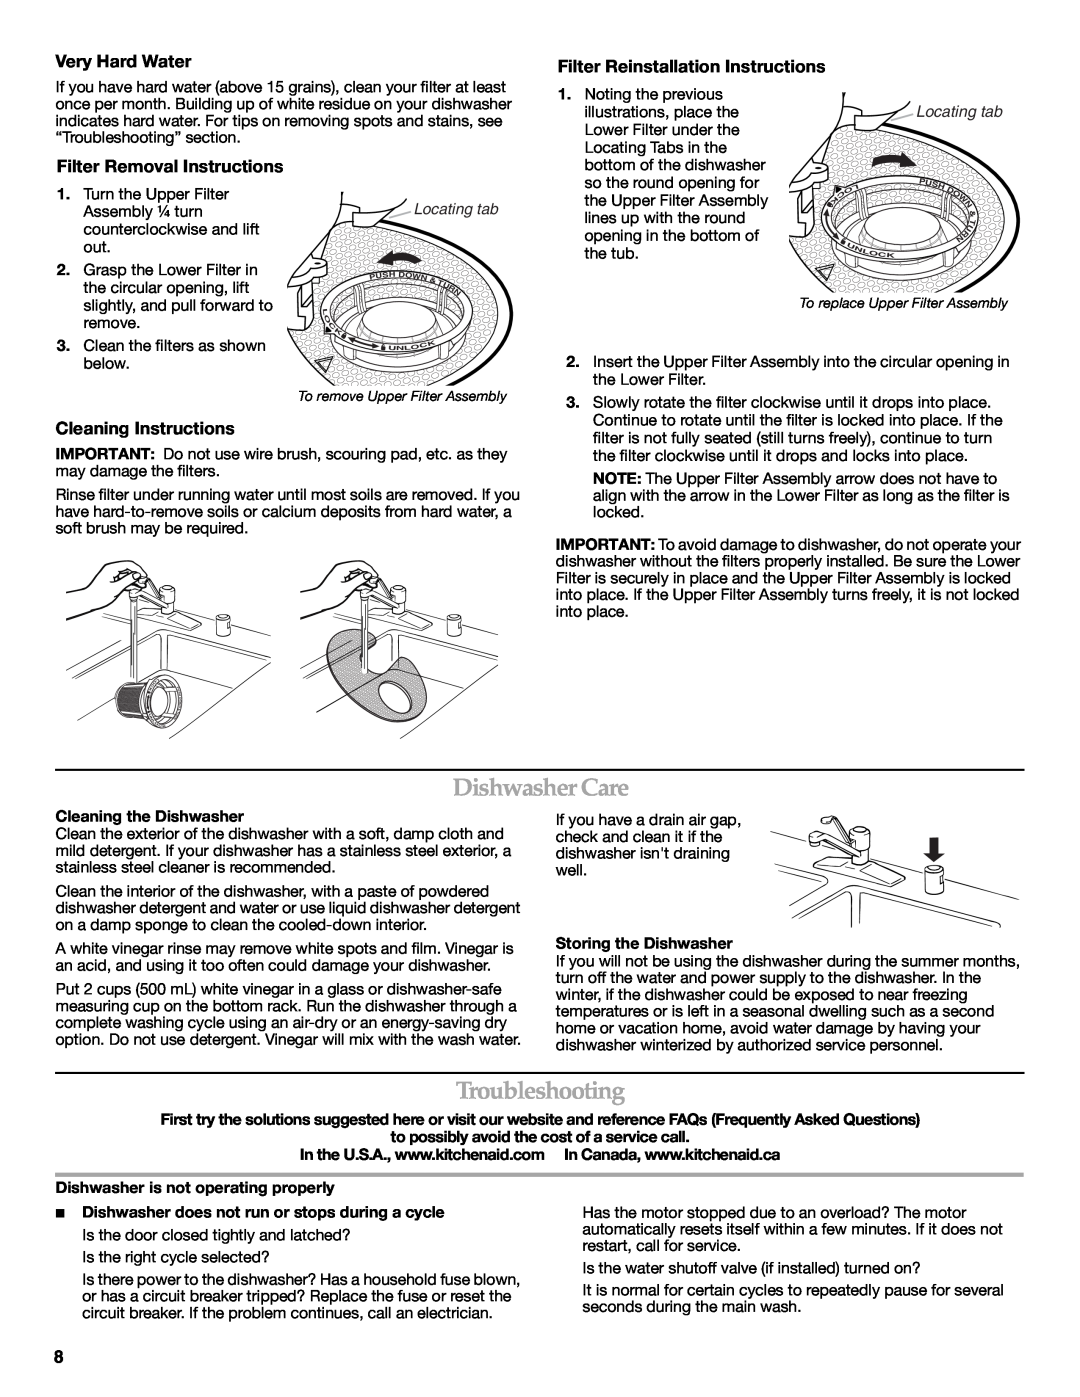 KitchenAid KUDE03FTSS Dishwasher Care, Troubleshooting, Very Hard Water, Filter Reinstallation Instructions, Locating tab 